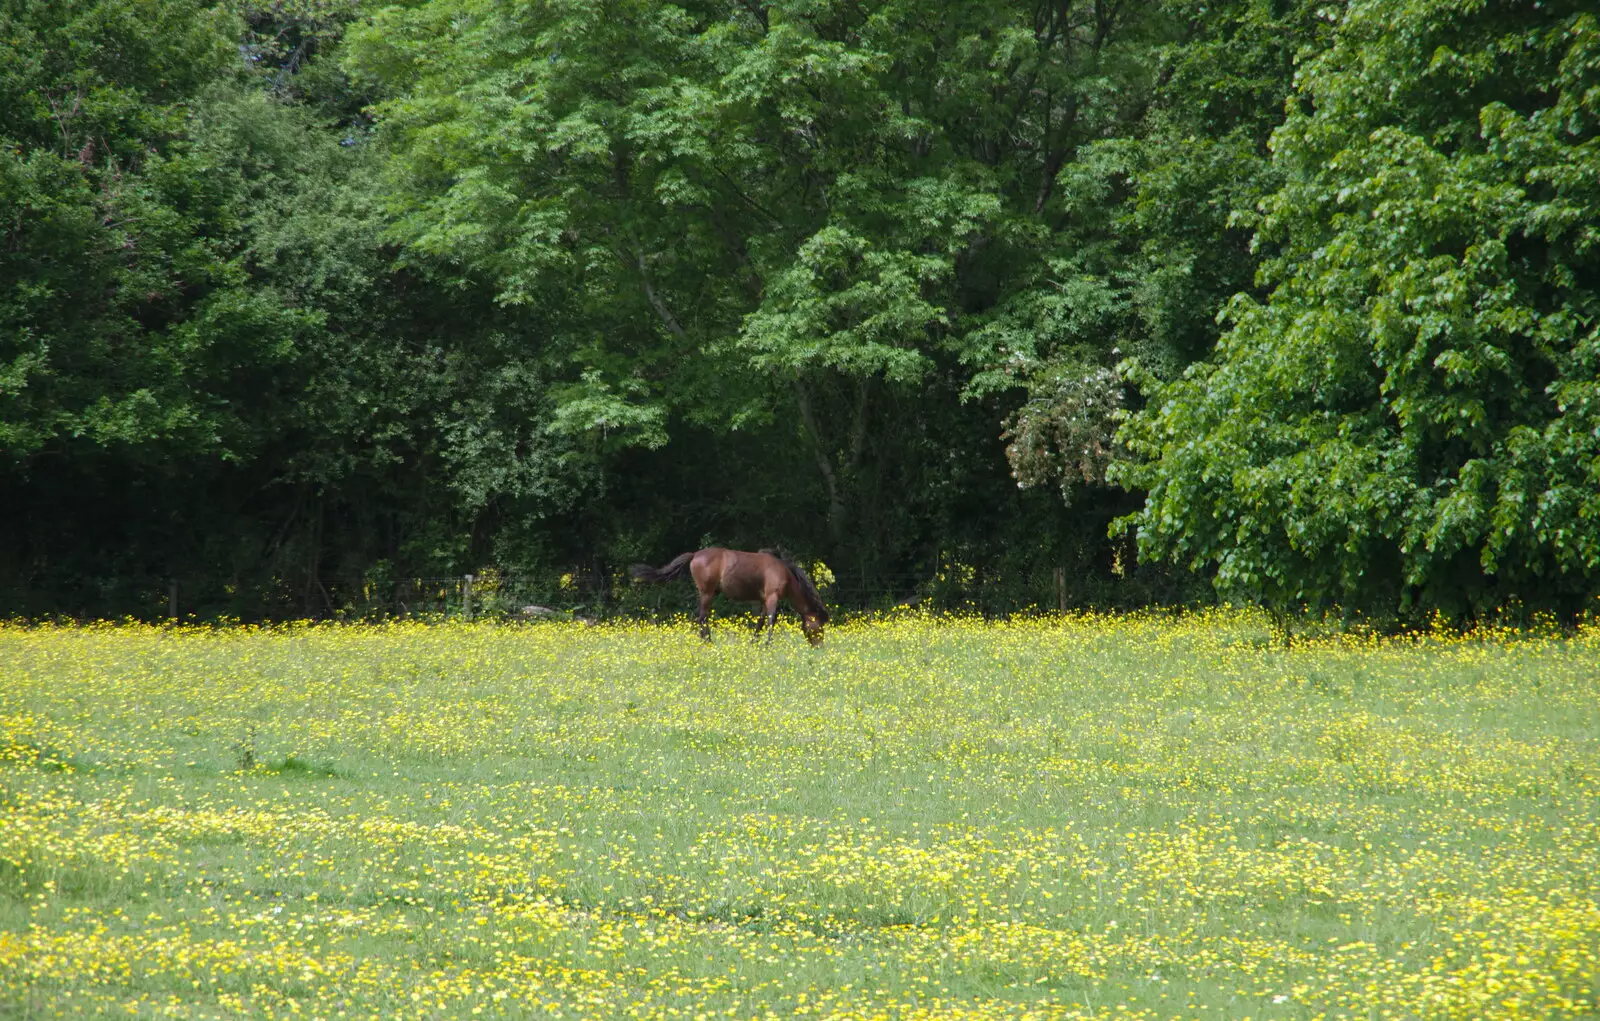 A pony in a yellow field, from Chagford Lido and a Trip to Parke, Bovey Tracey, Devon - 25th May 2019